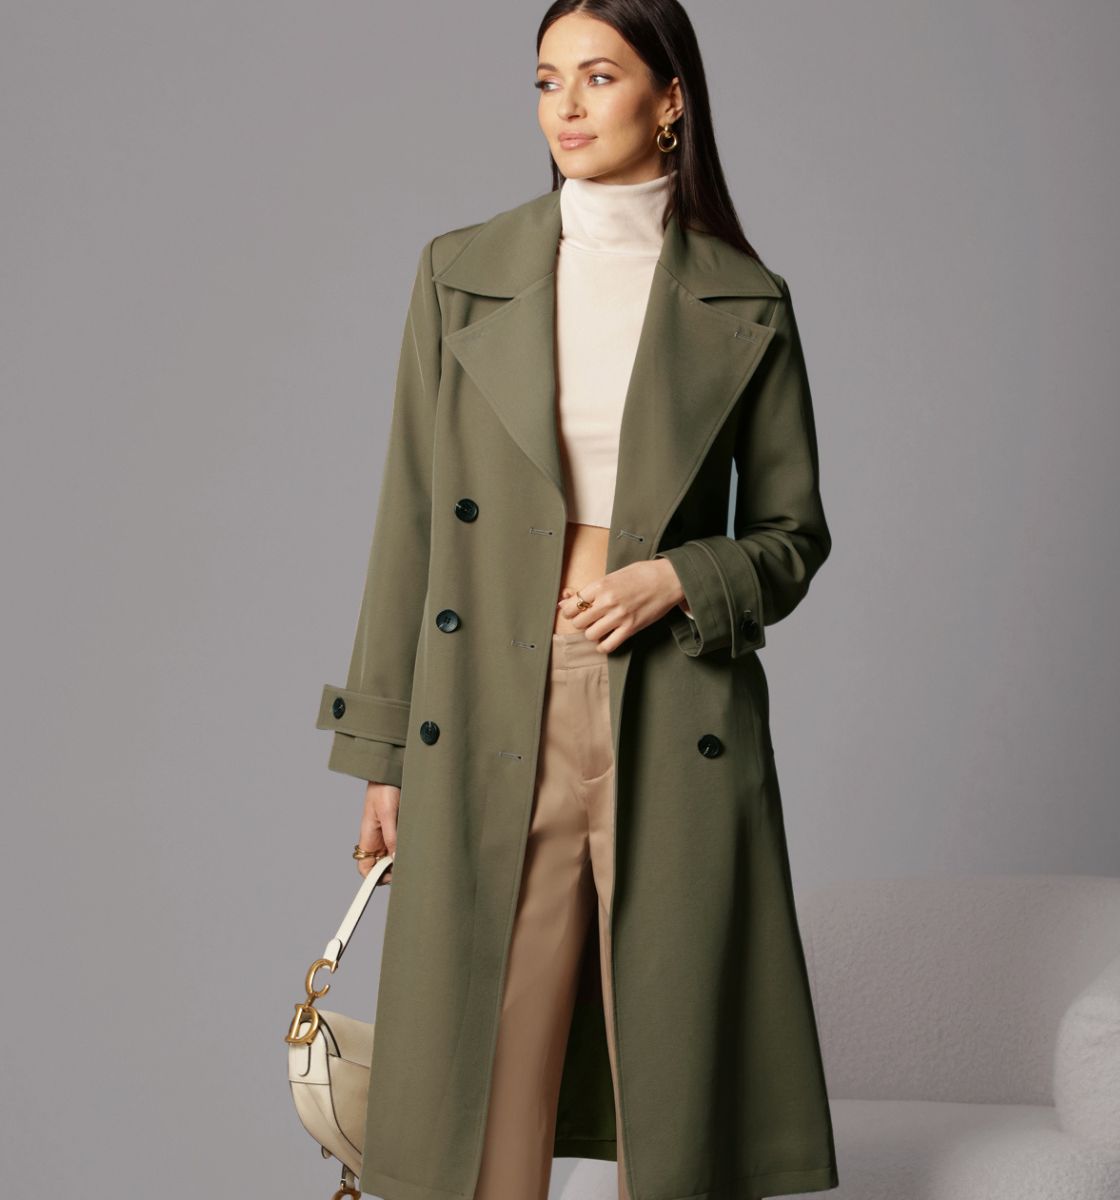 Olive green long trench coat by Avec Les Filles